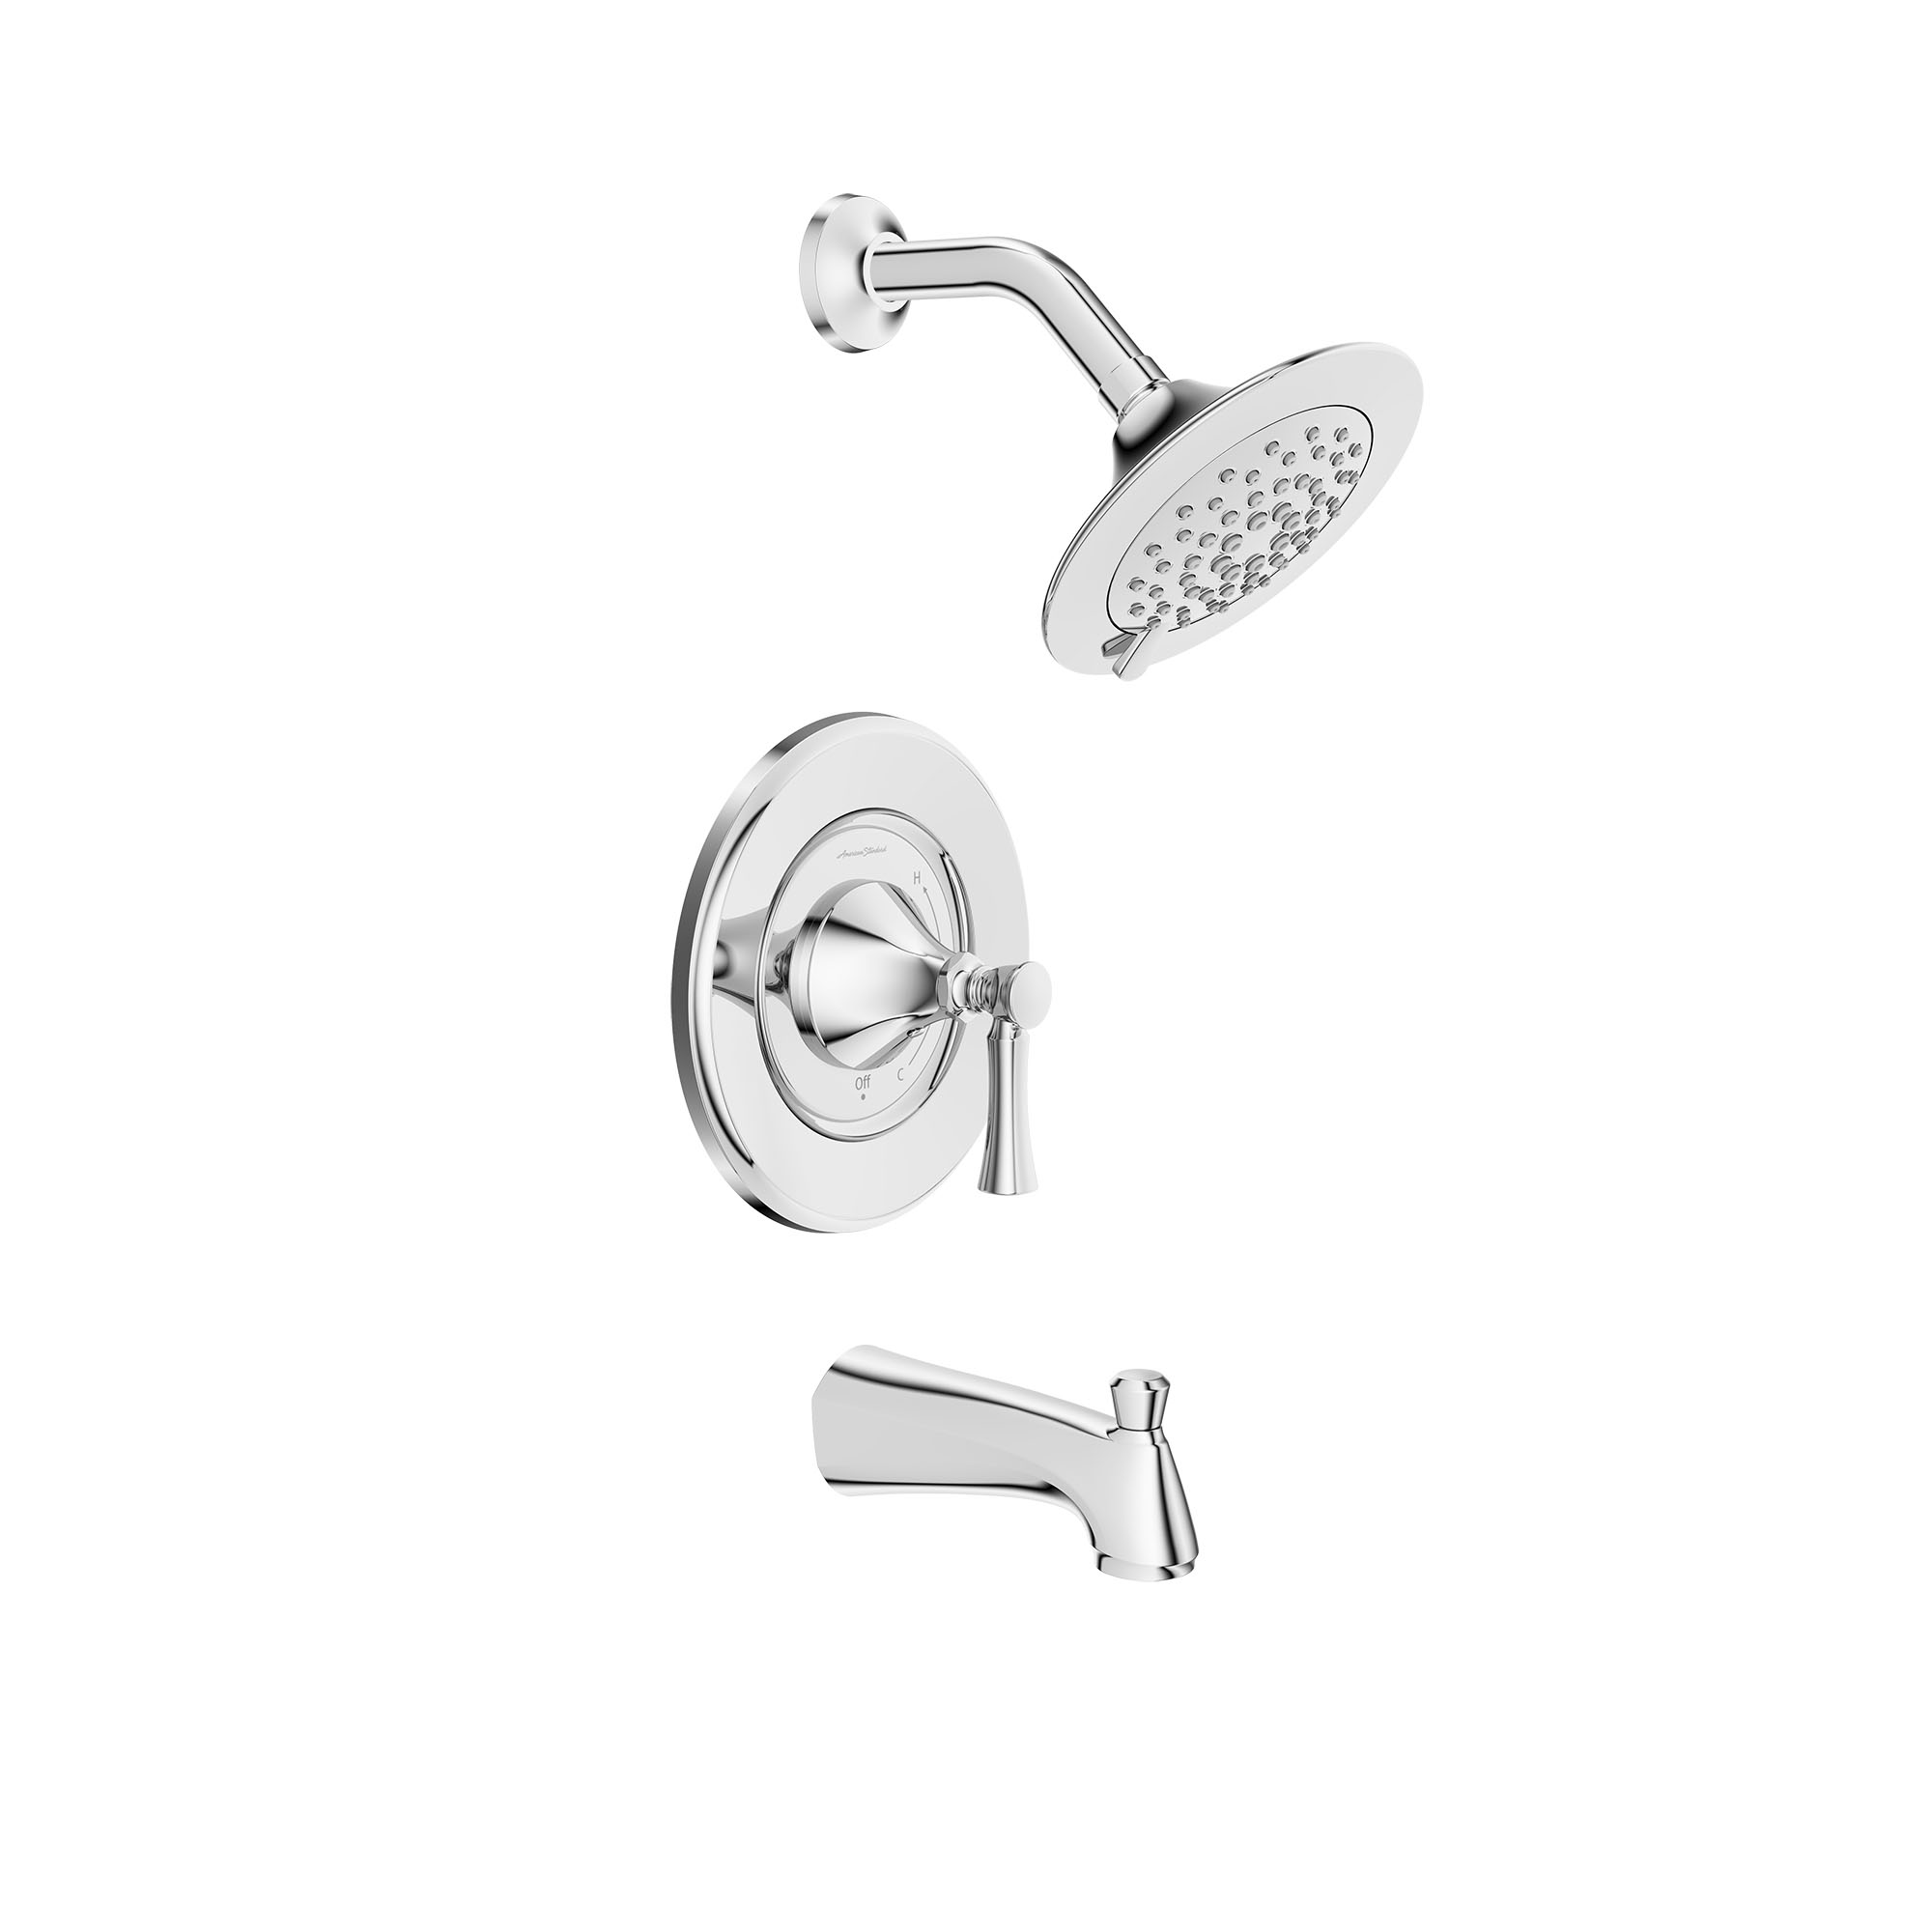 Chancellor® 1.8 gpm/6.8 L/min Tub and Shower Trim Kit With Ceramic Disc Valve Cartridge and Lever Handle